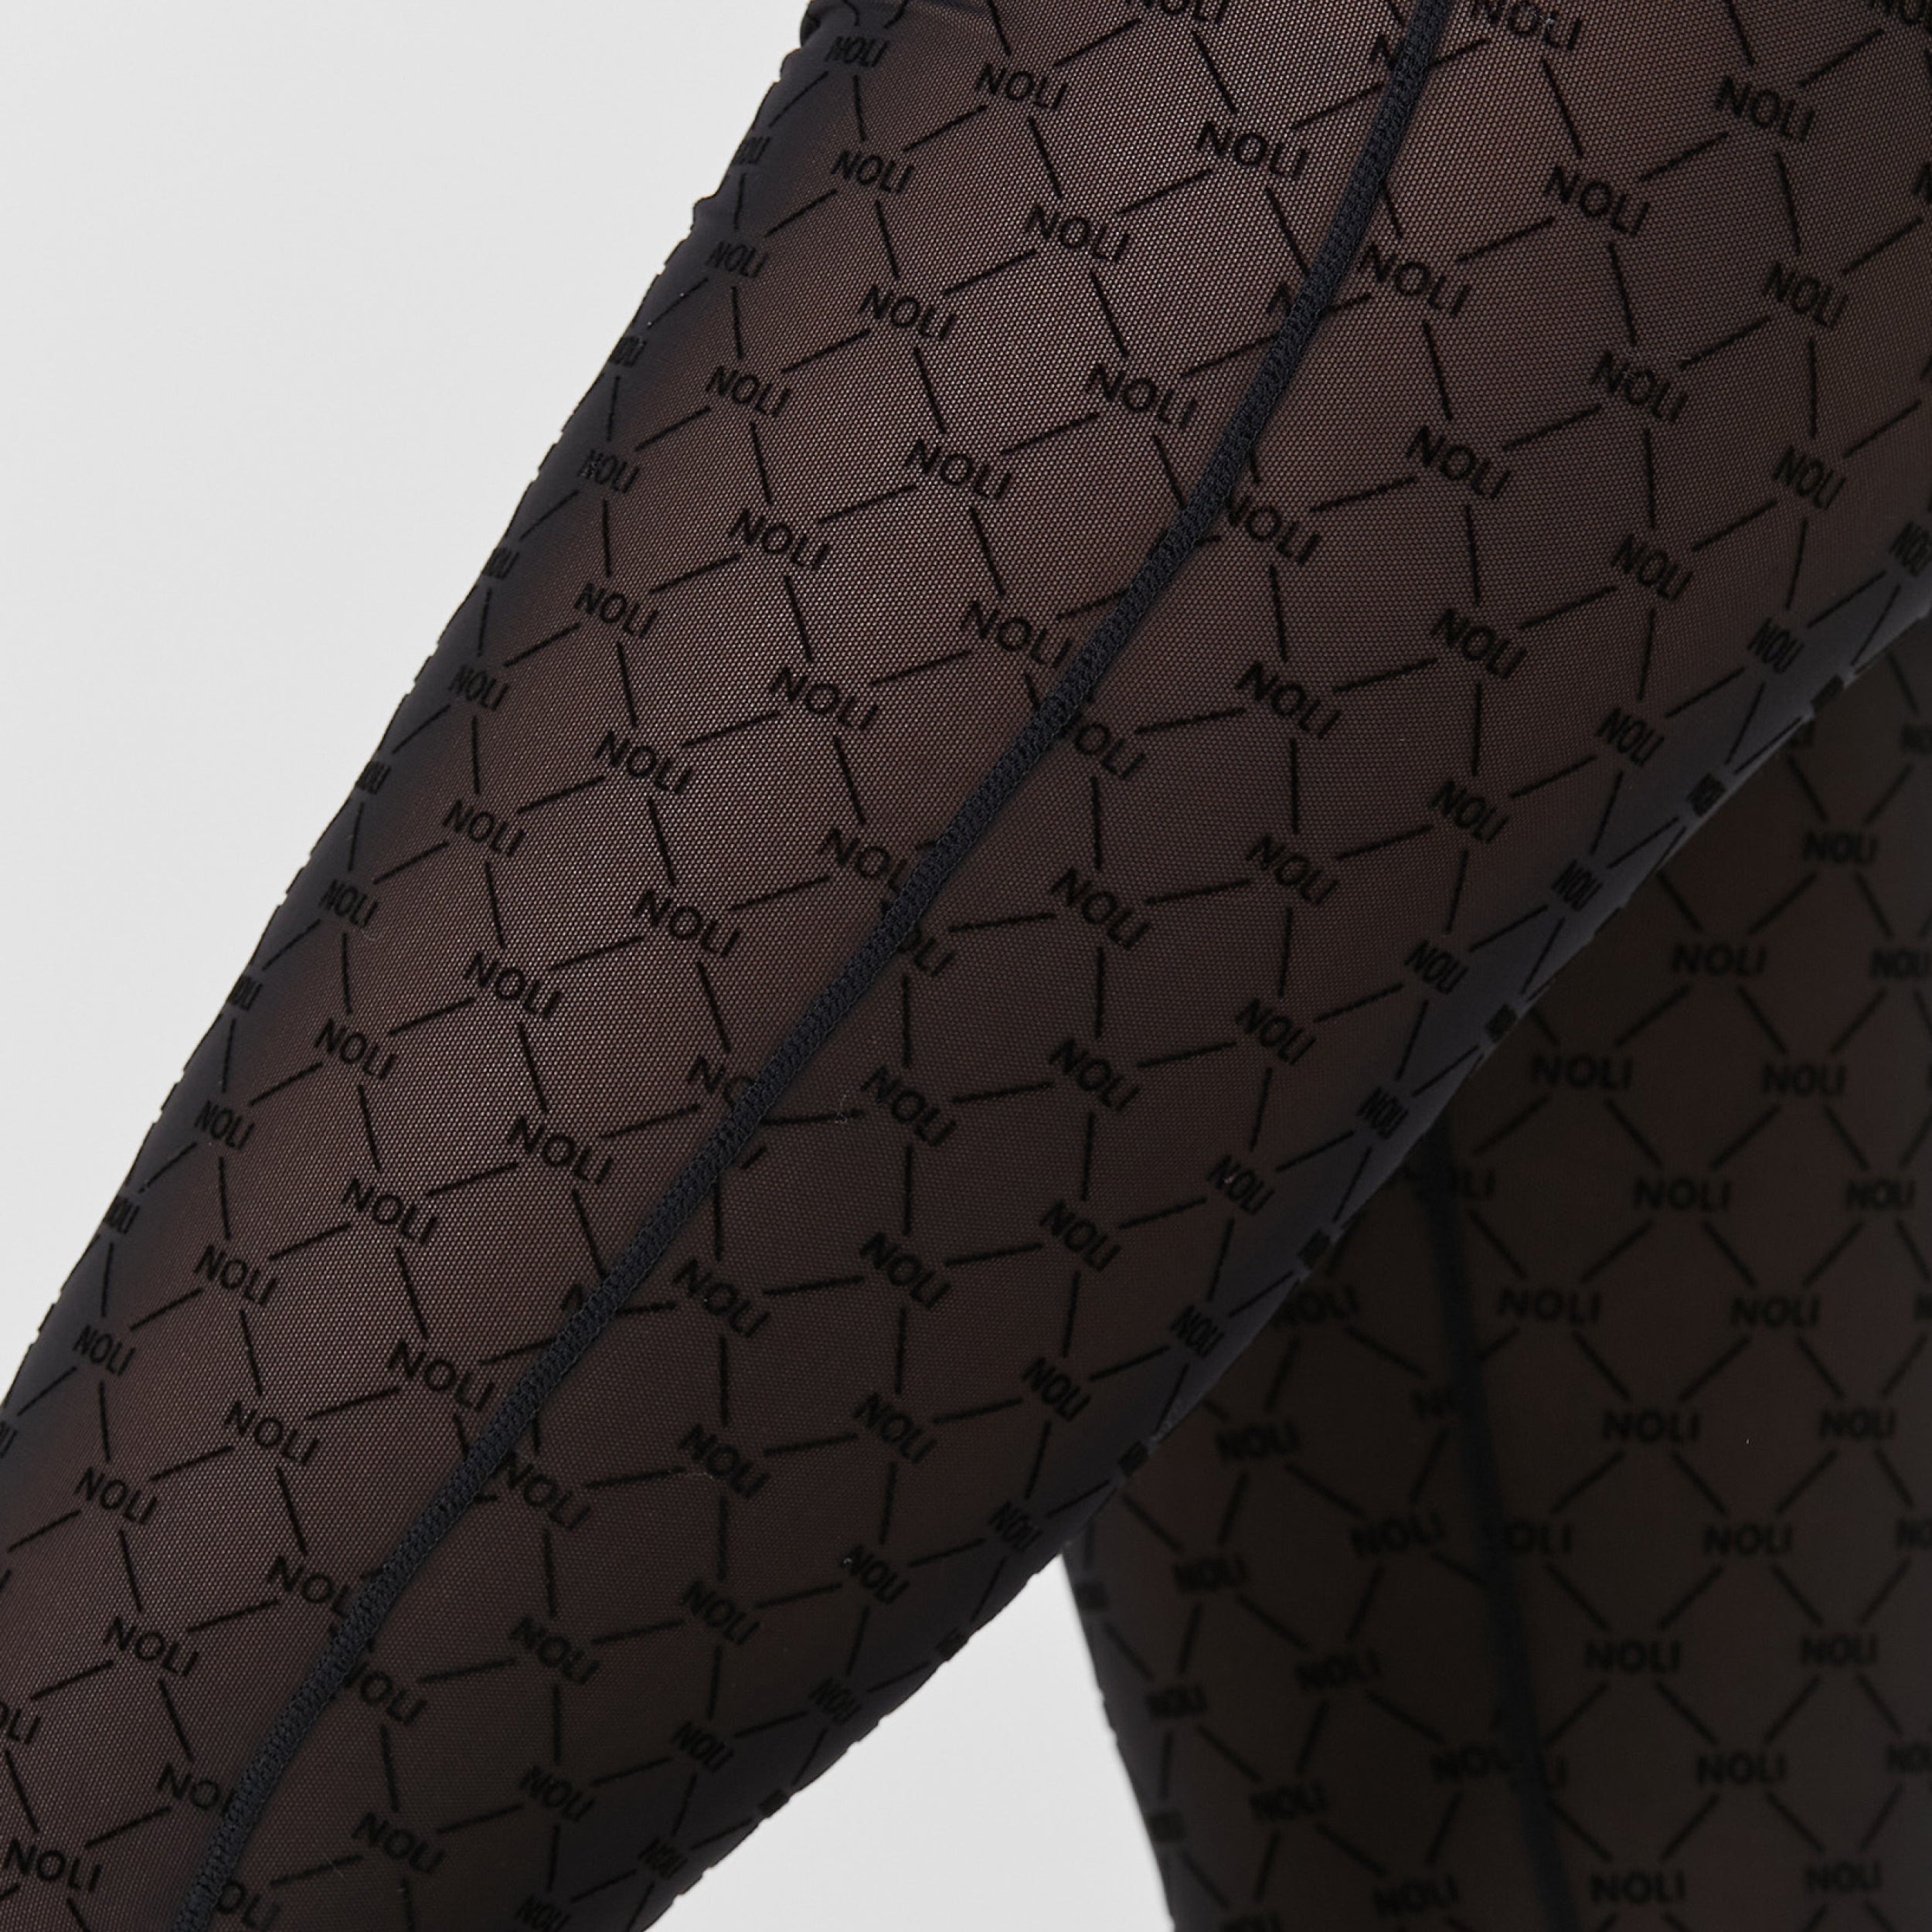 Close up view of woman wearing tights featuring ultra-soft and comfortable NOLI monogram mesh, slip this four-way stretch mesh